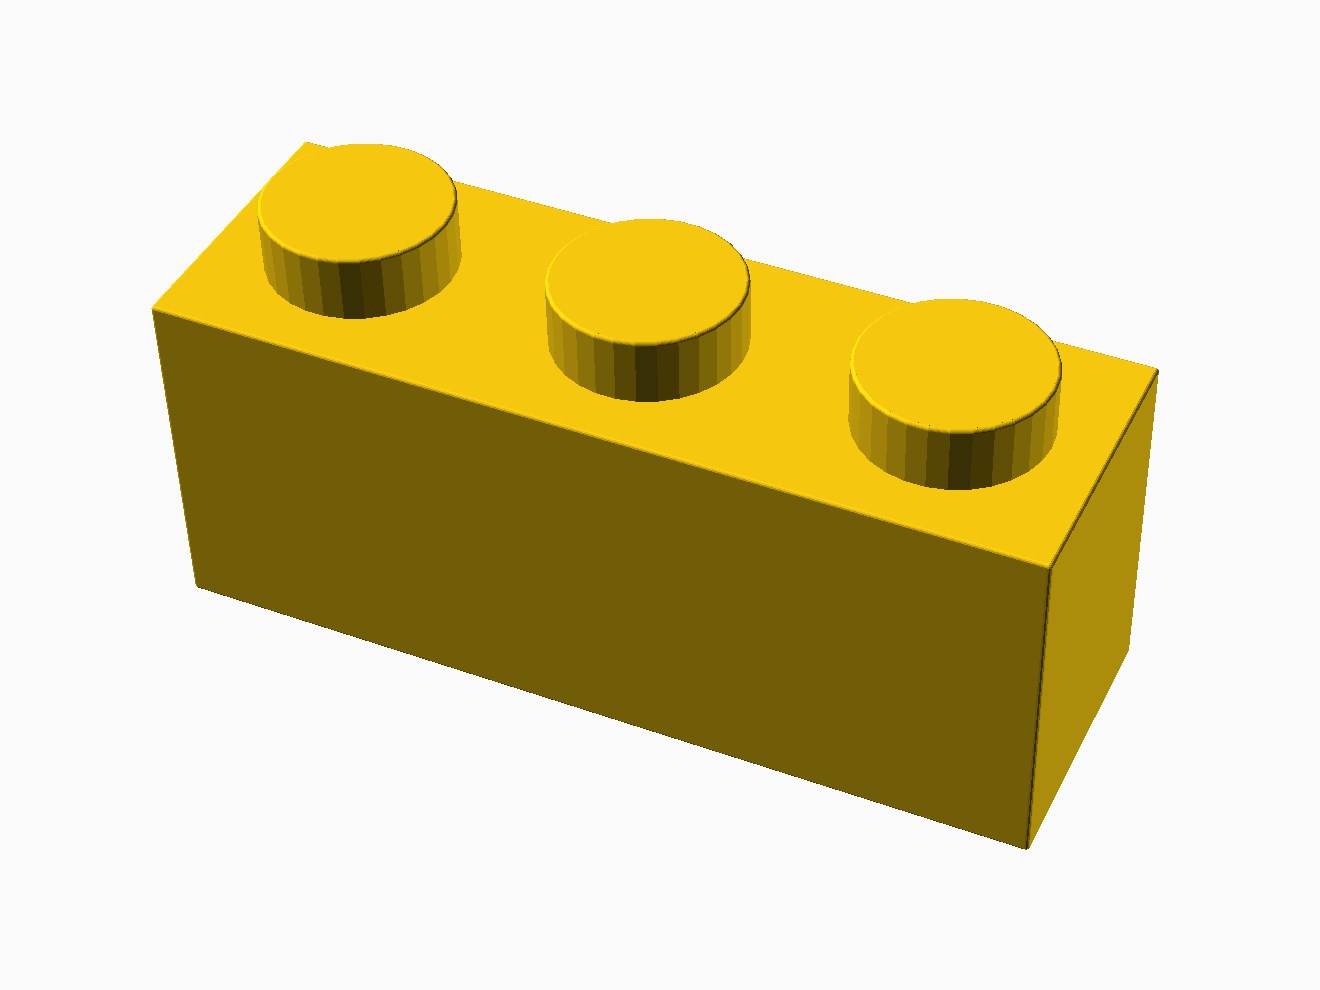 3D printable model of a LEGO 3x1 Brick with standard knobs.